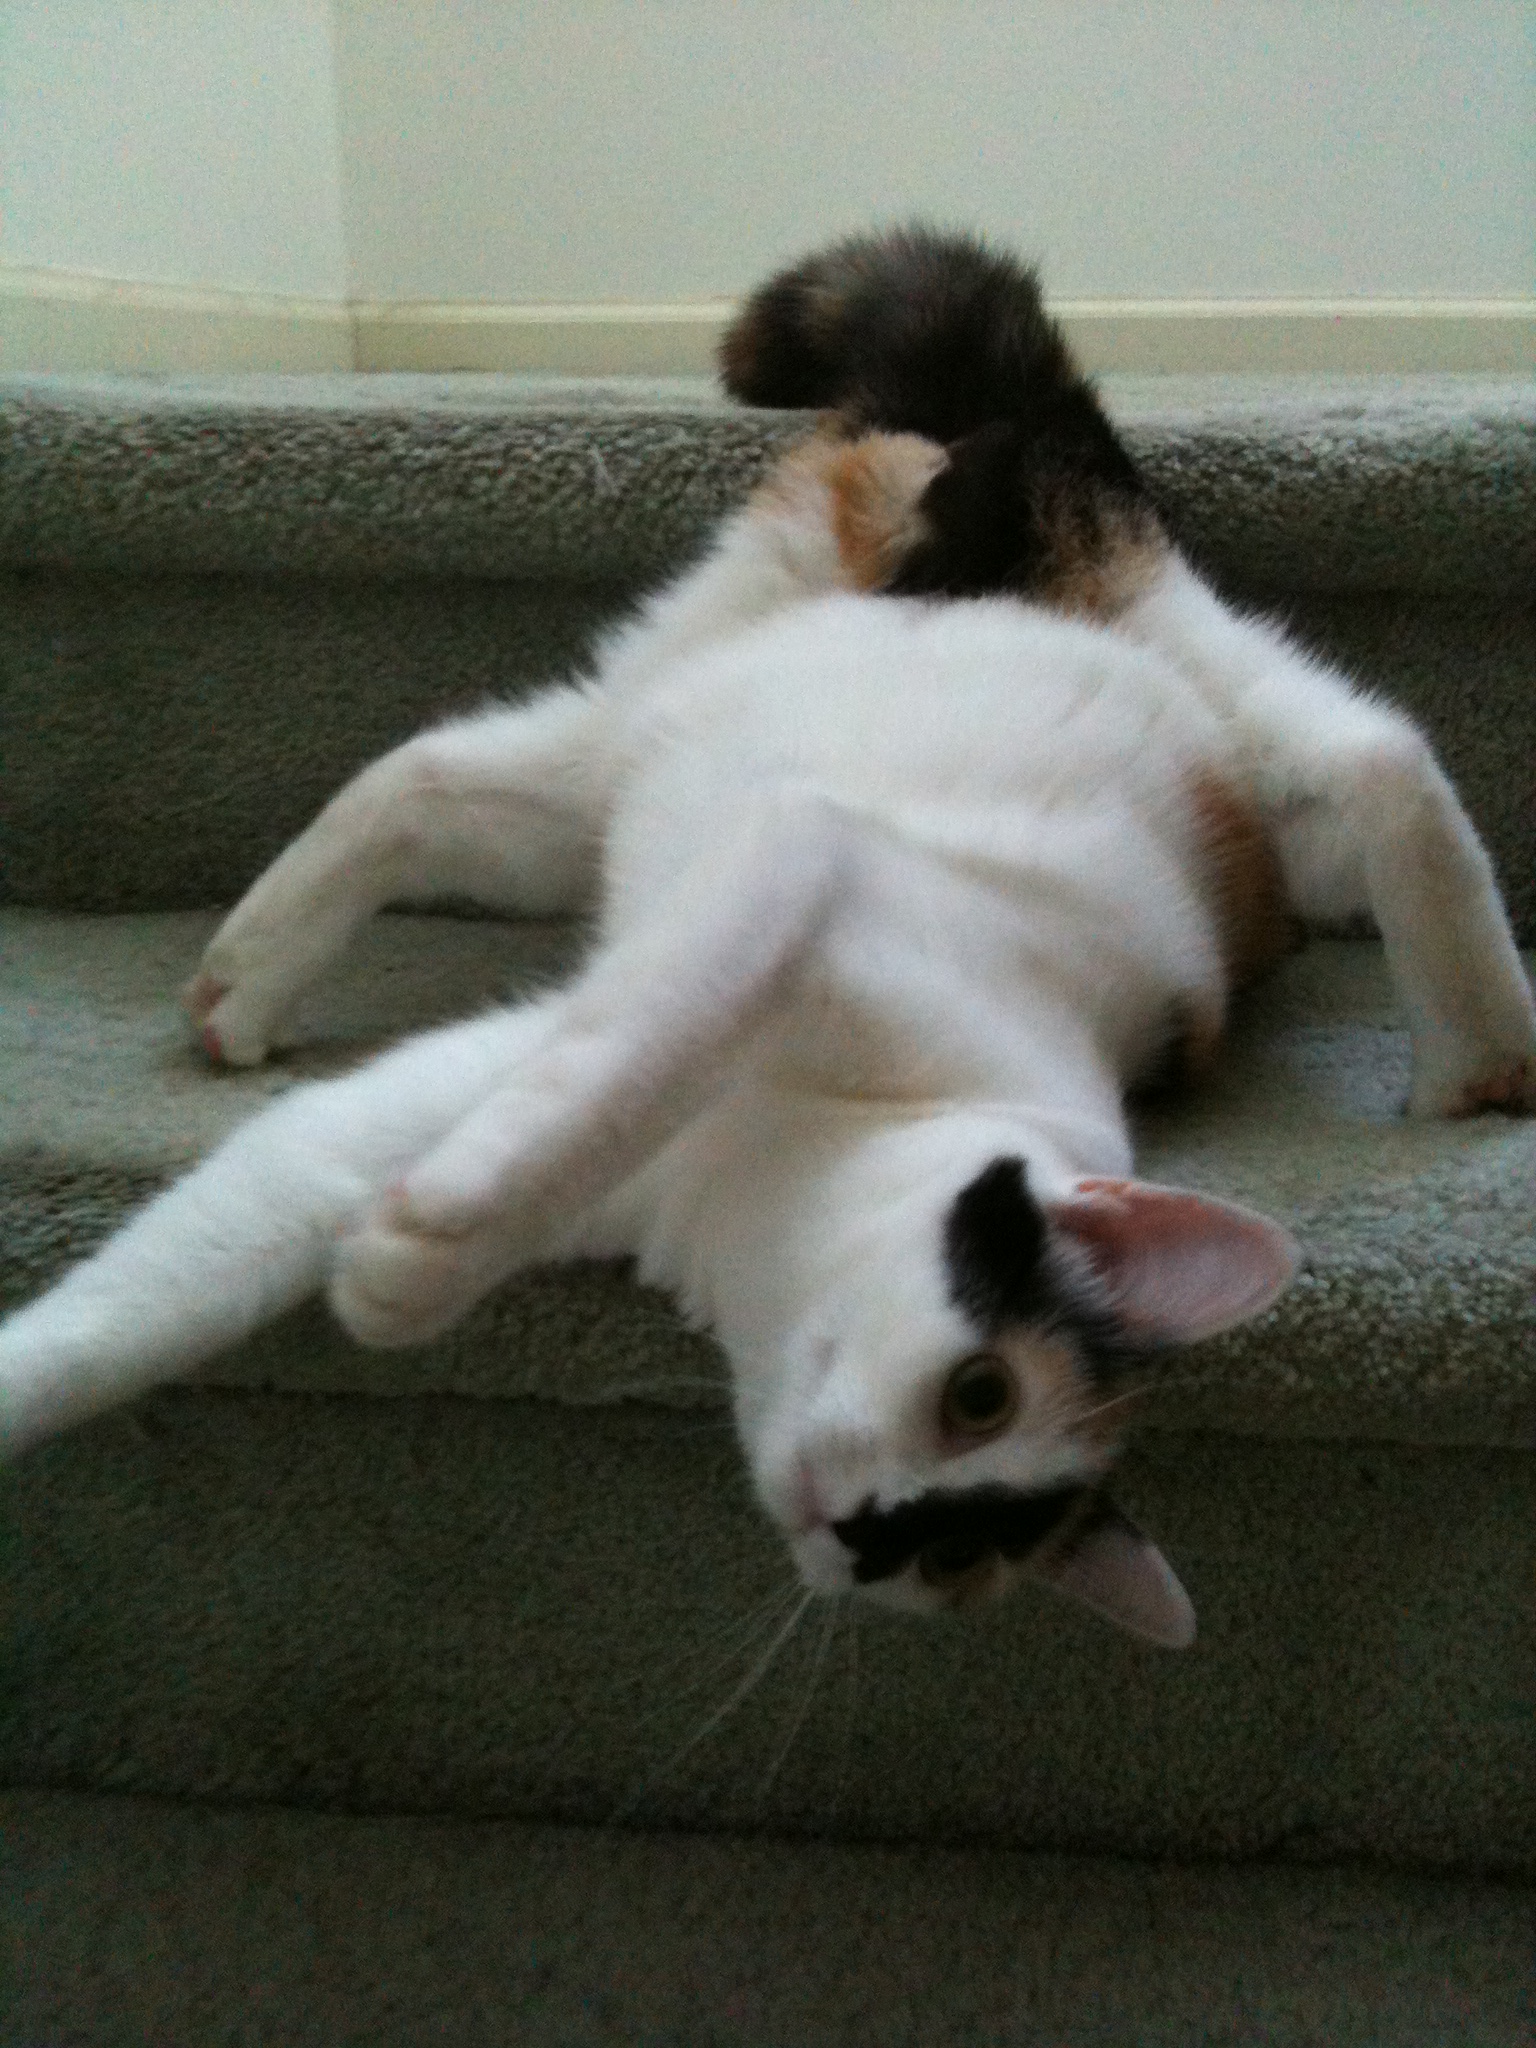 Cat Yoga (user submitted)